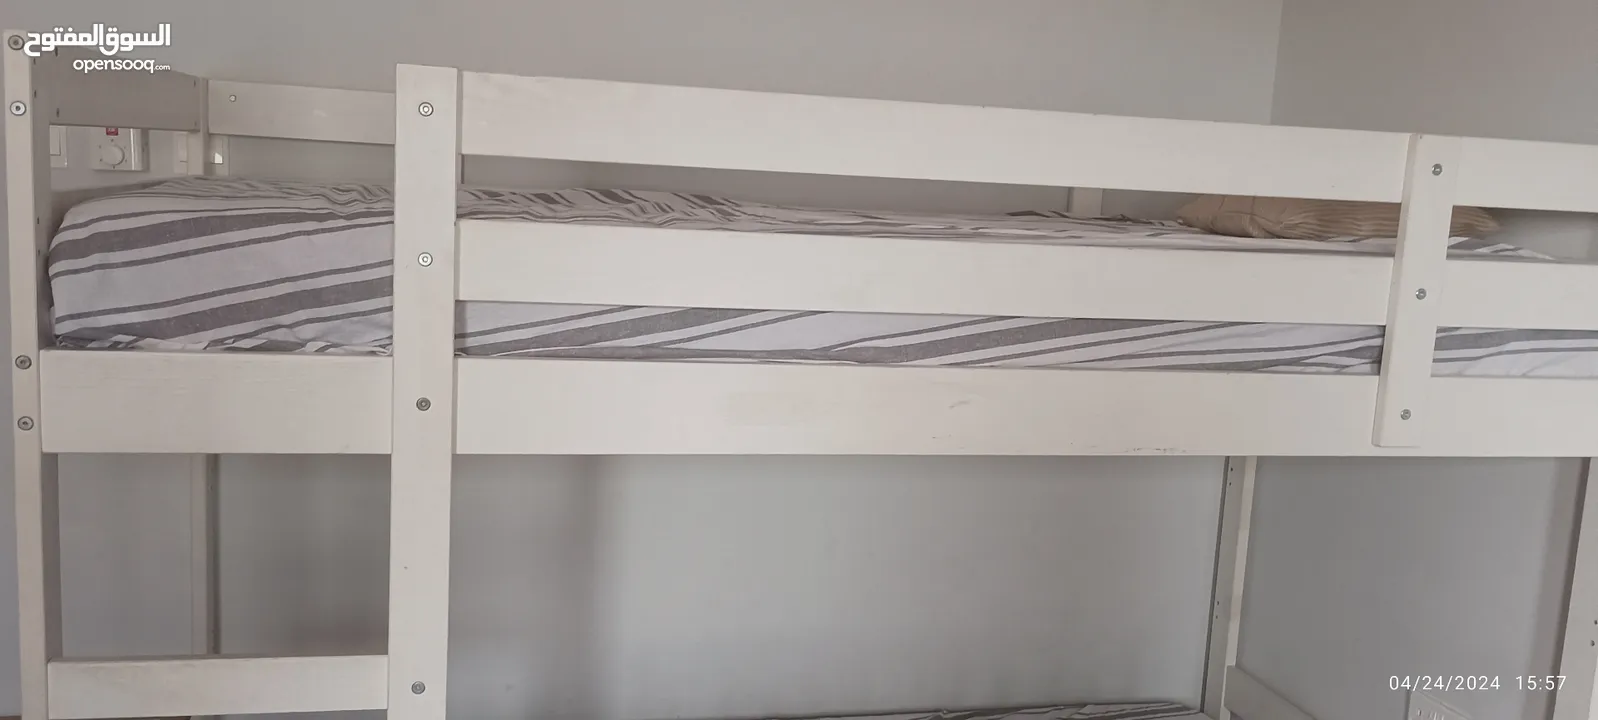 ikea bunk bed with one mattres